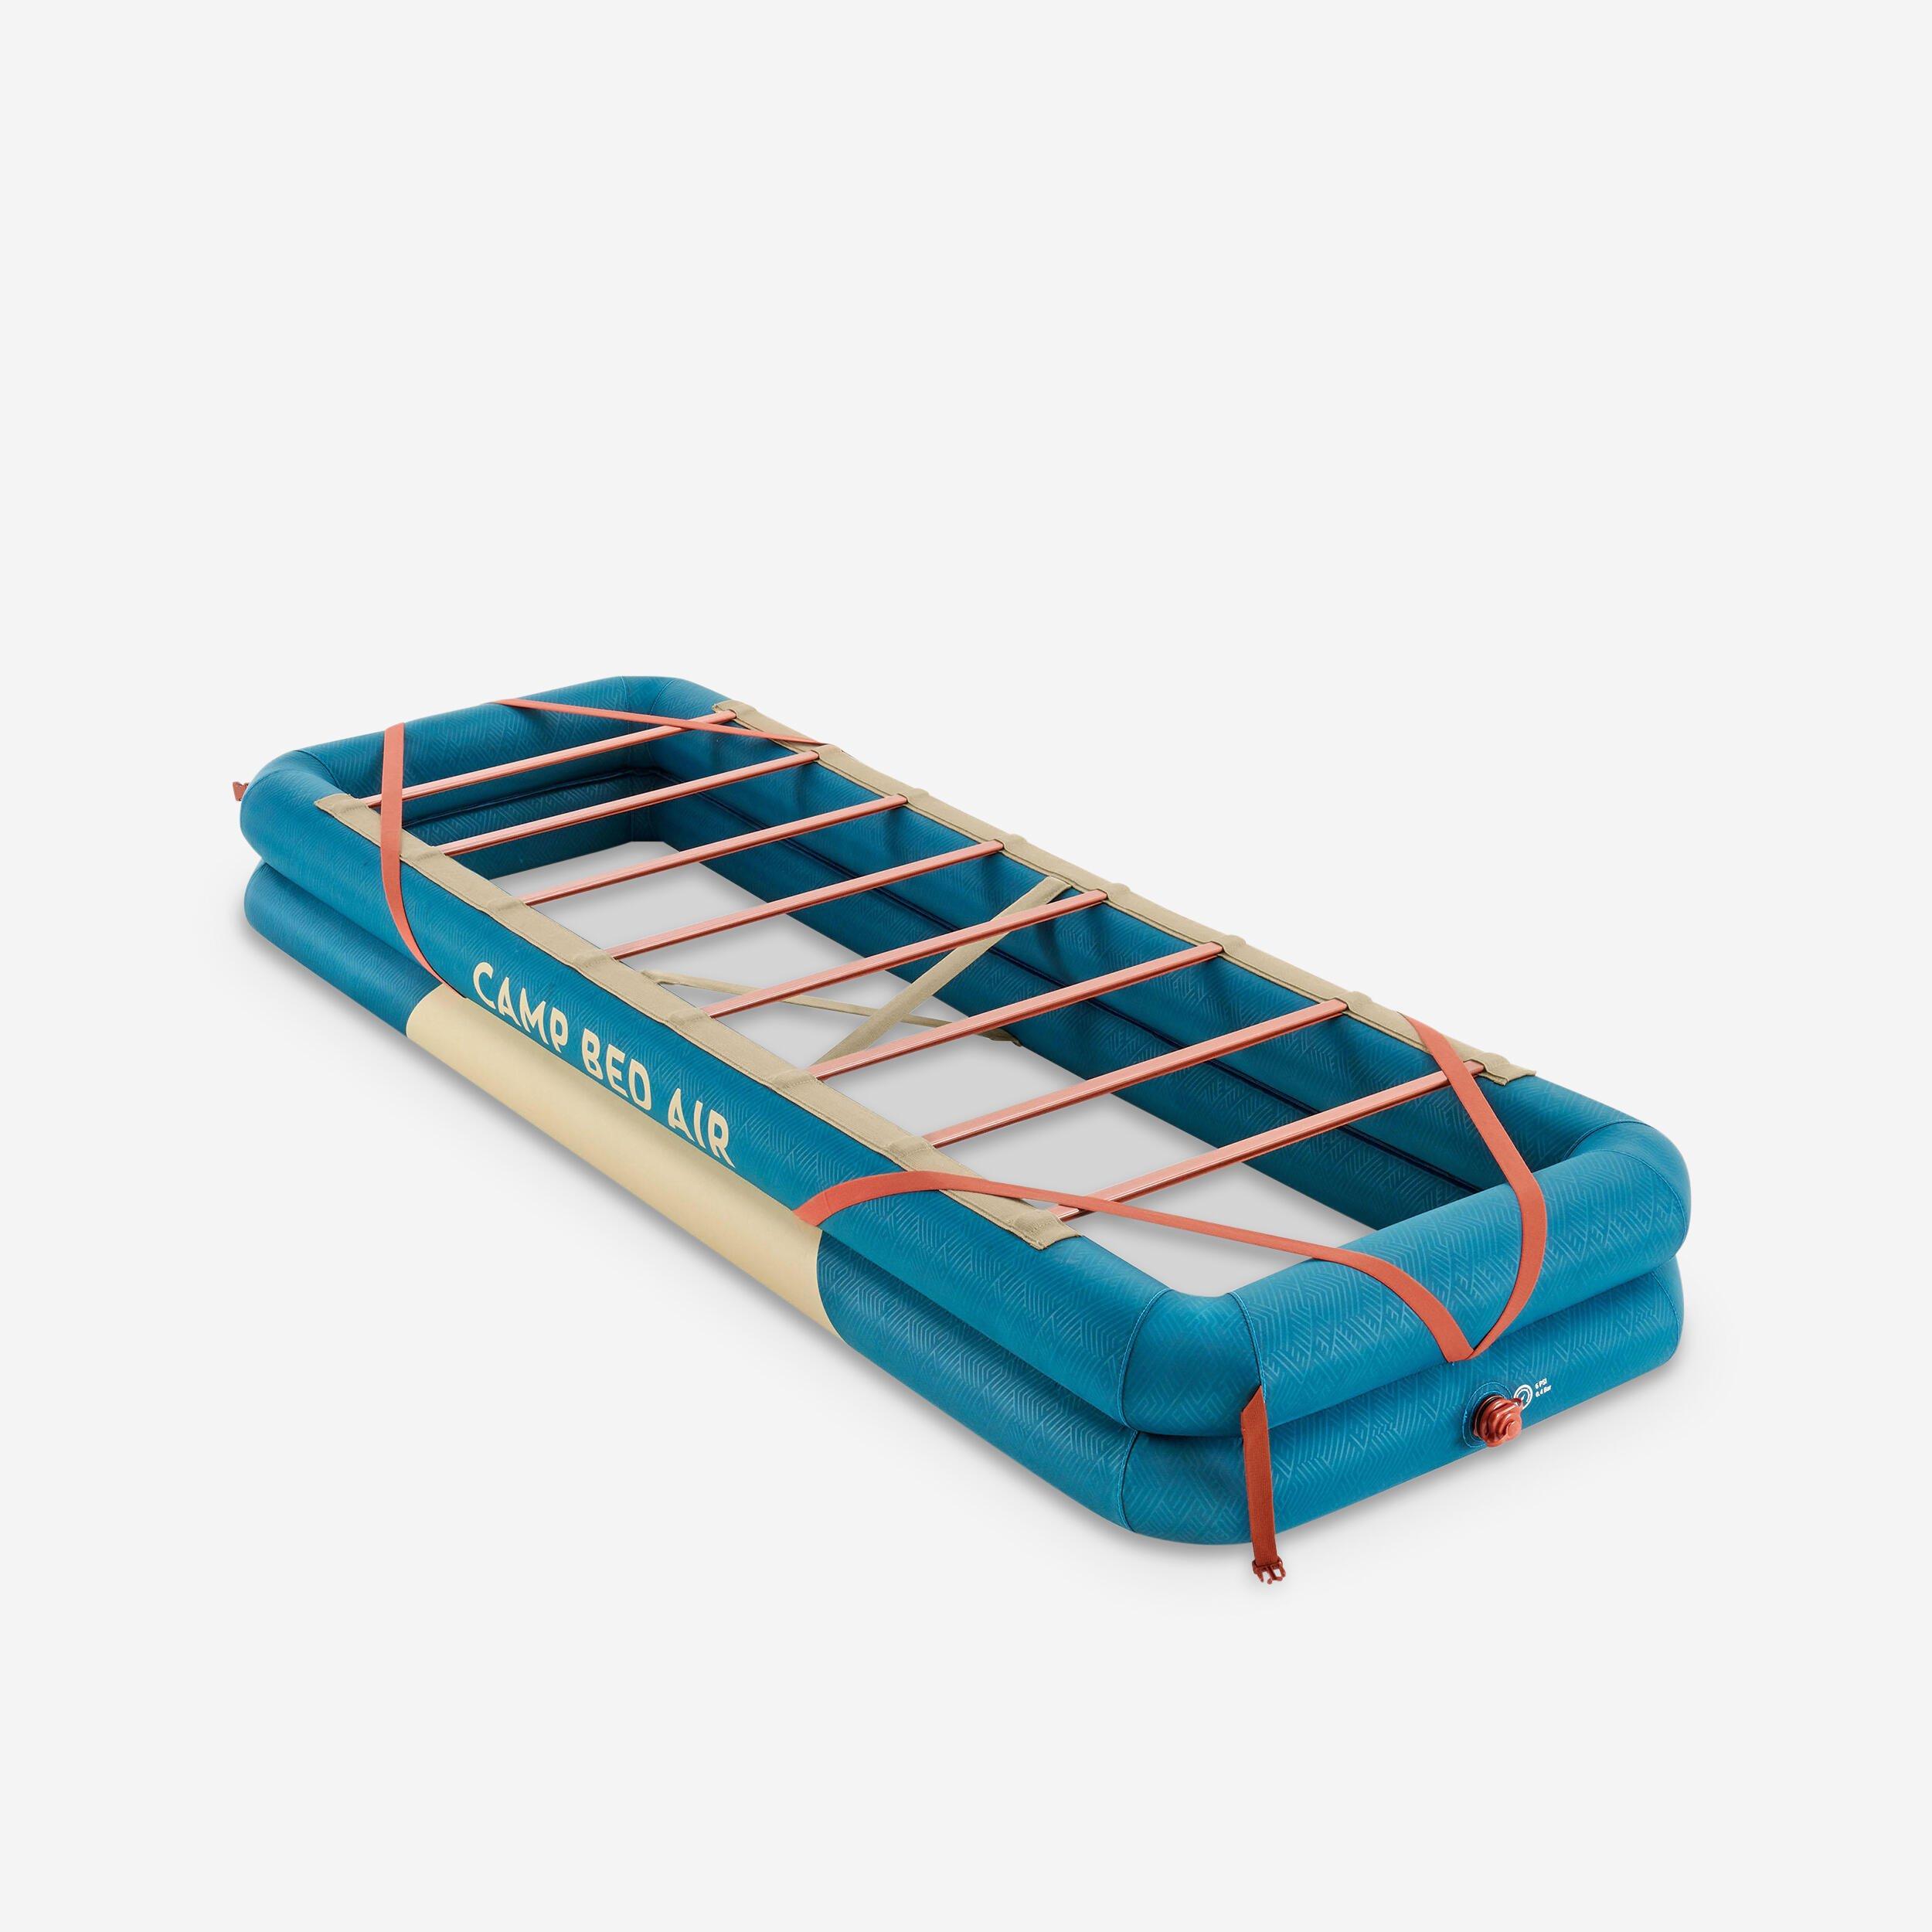 Decathlon Inflatable Camping Bed Base - Camp Bed Air 70 Cm - 1 Person